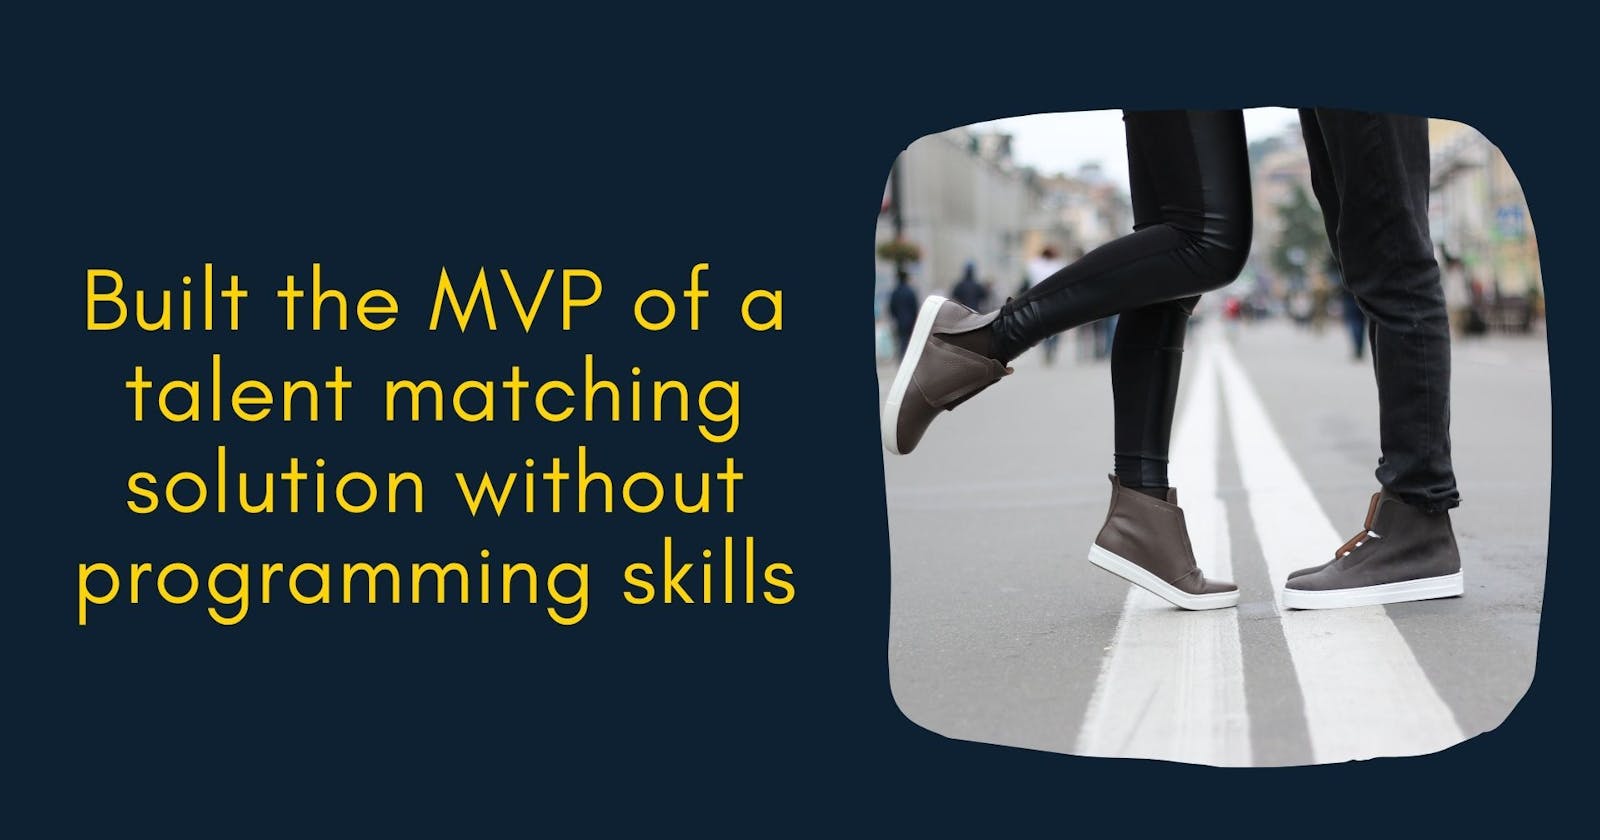 Built the MVP of a talent matching solution without programming skills